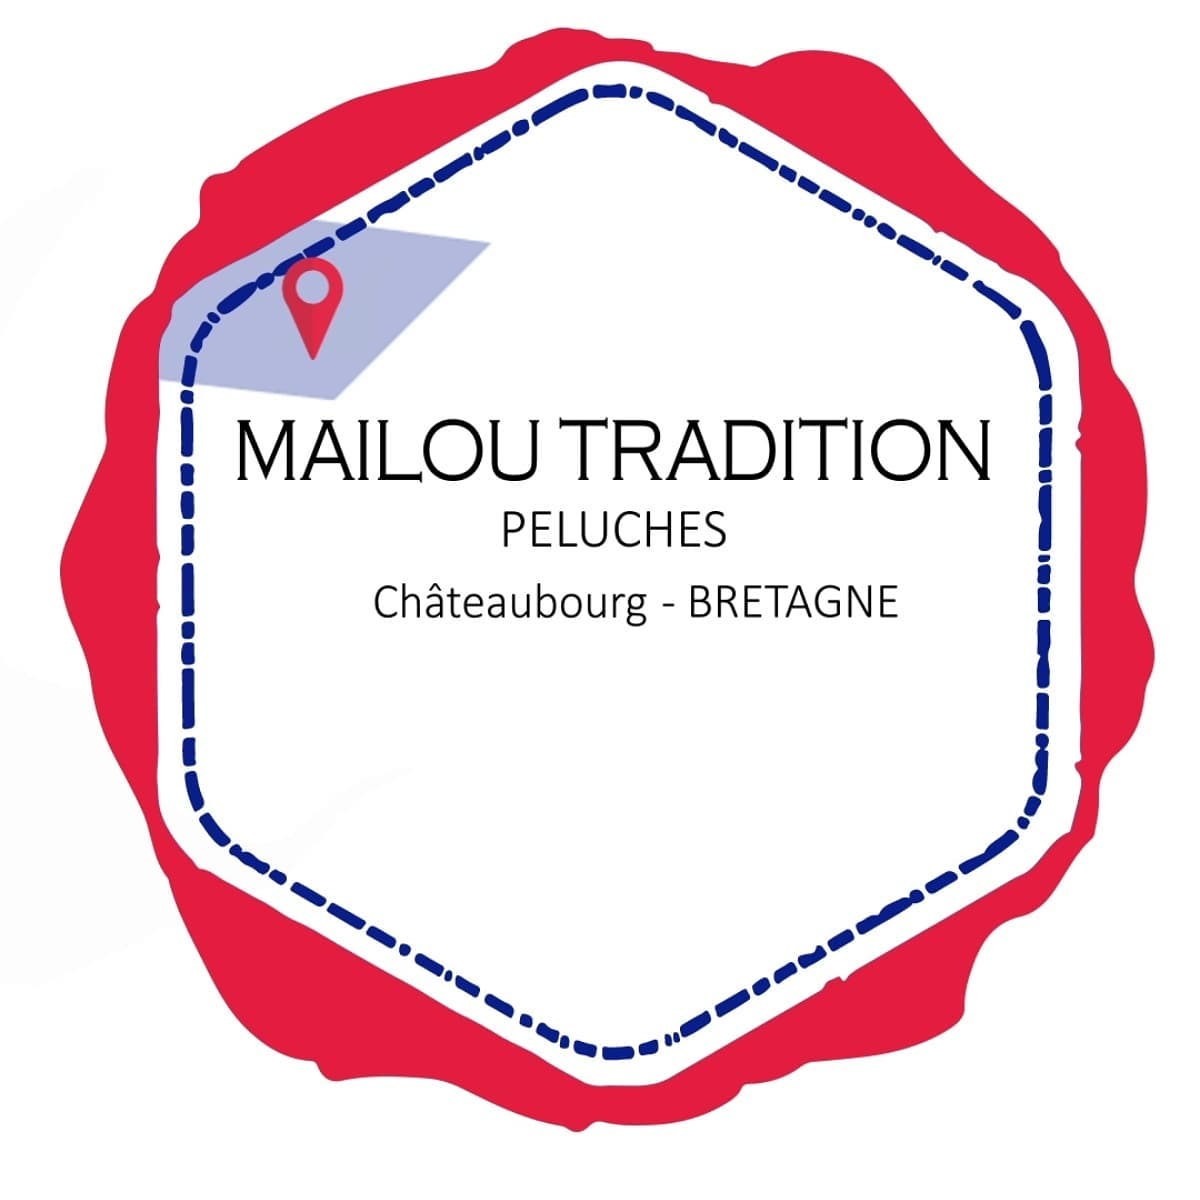 MAILOU TRADITION, peluches et doudous made in France